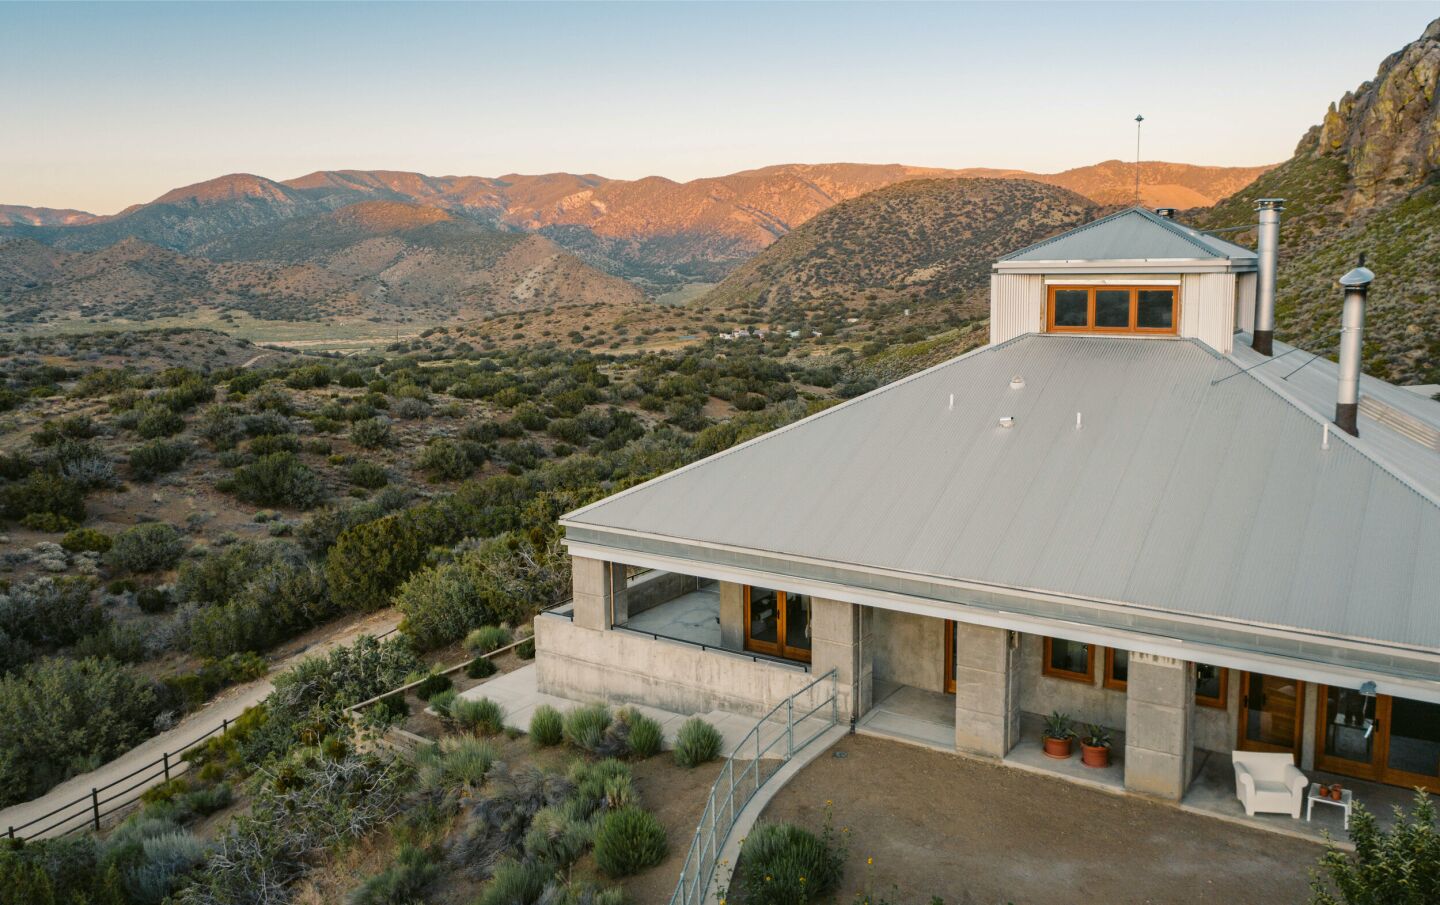 An aerial view shows the steel roof and concrete pillars of the home.